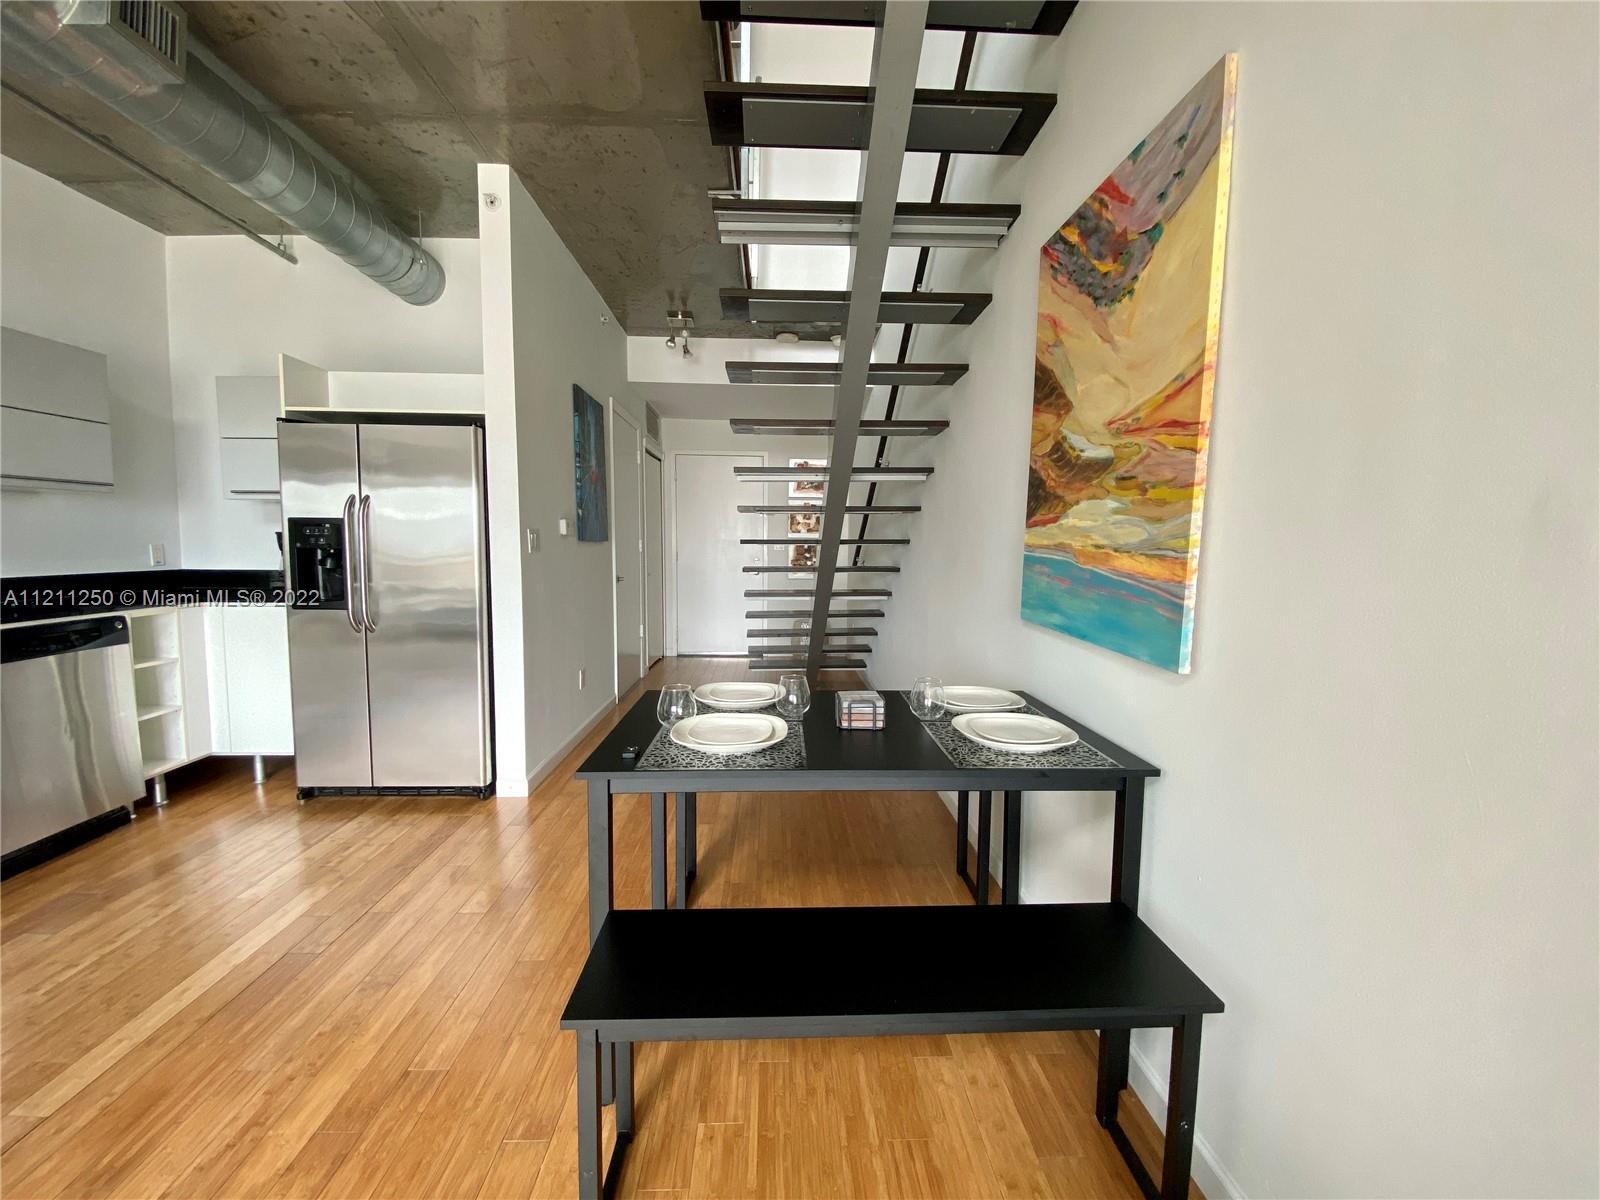 Industrial design Modern loft with amazing views of the Miami River. Beautiful 1bd/1 1.5 bath, Furnished, bamboo floors, two-story with living/dining downstairs with kitchen, half bath with built-in washer/dryer. Master bedroom & bathroom upstairs. Enjoy Miami River views and the city on Both levels. Full amenities building offering pool, gym, dog park, cigar parlor, family room, and valet service. Excellent security throughout the building. Easy to show, call agent 1 assigned parking space. If the lease is for less than 1 year the commission will be 5%. Very easy to show.